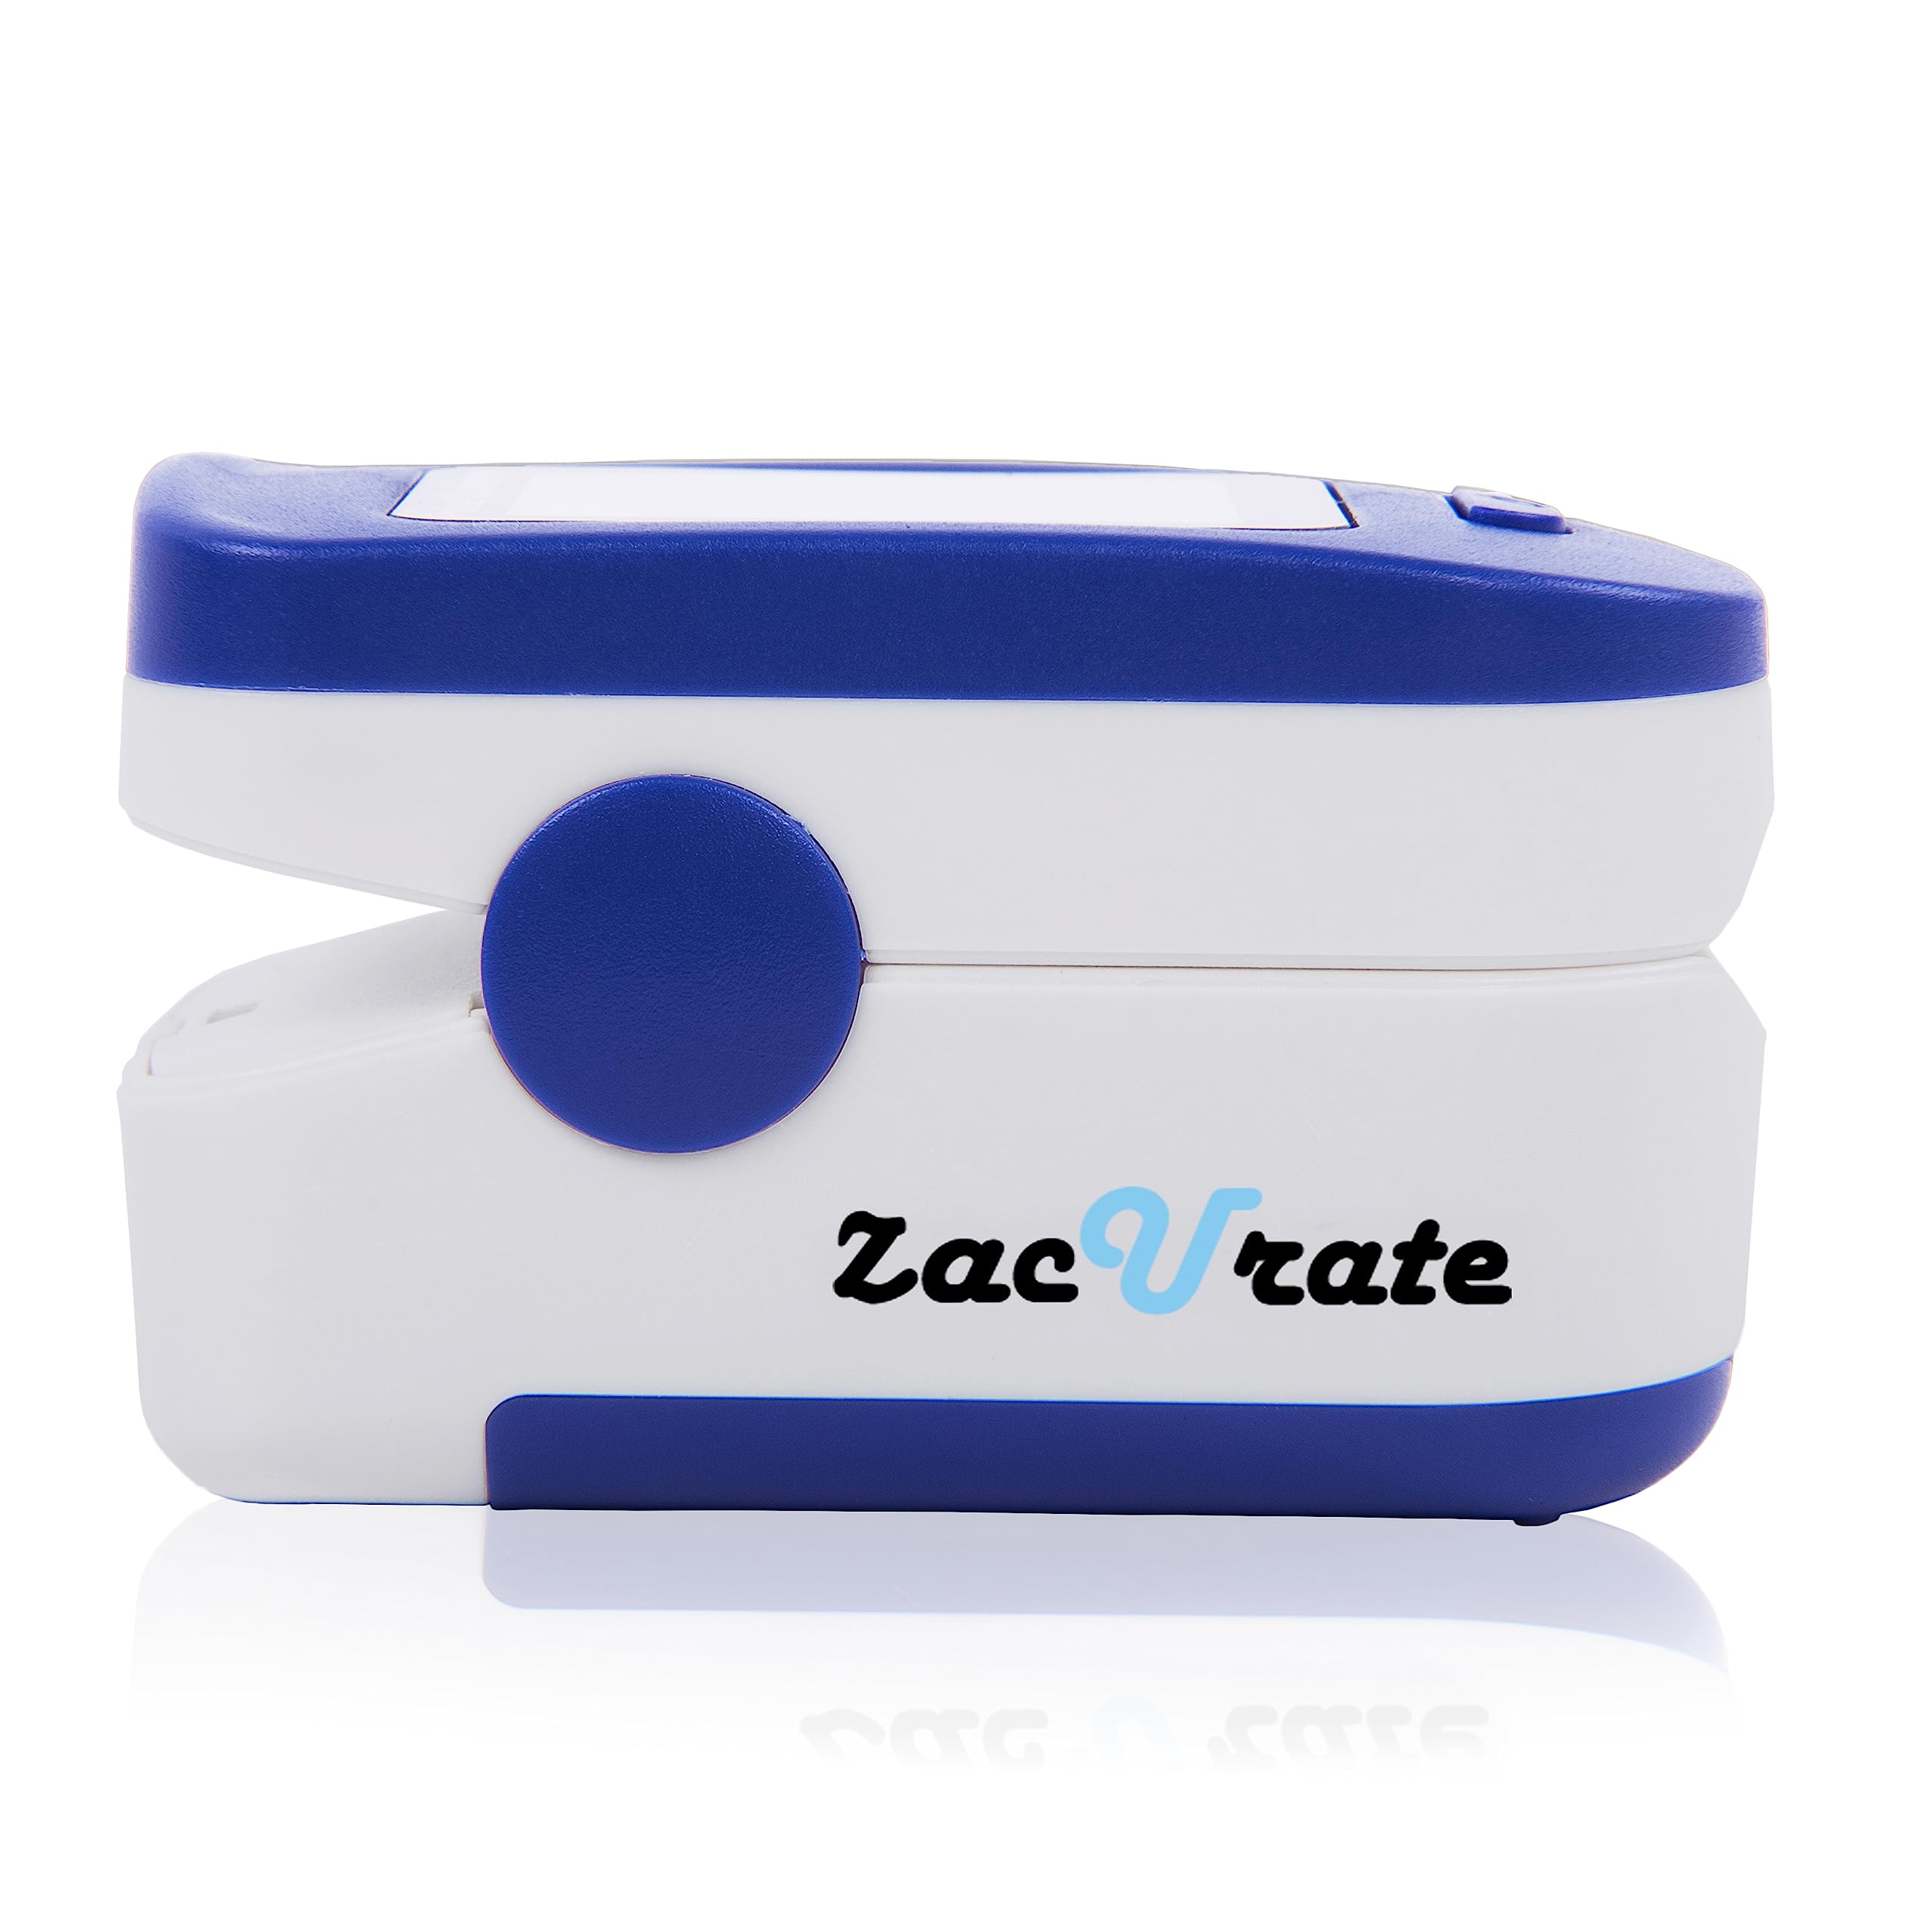 Zacurate 500BL Fingertip Pulse Oximeter Blood Oxygen Saturation Monitor with Batteries Included (Navy Blue)